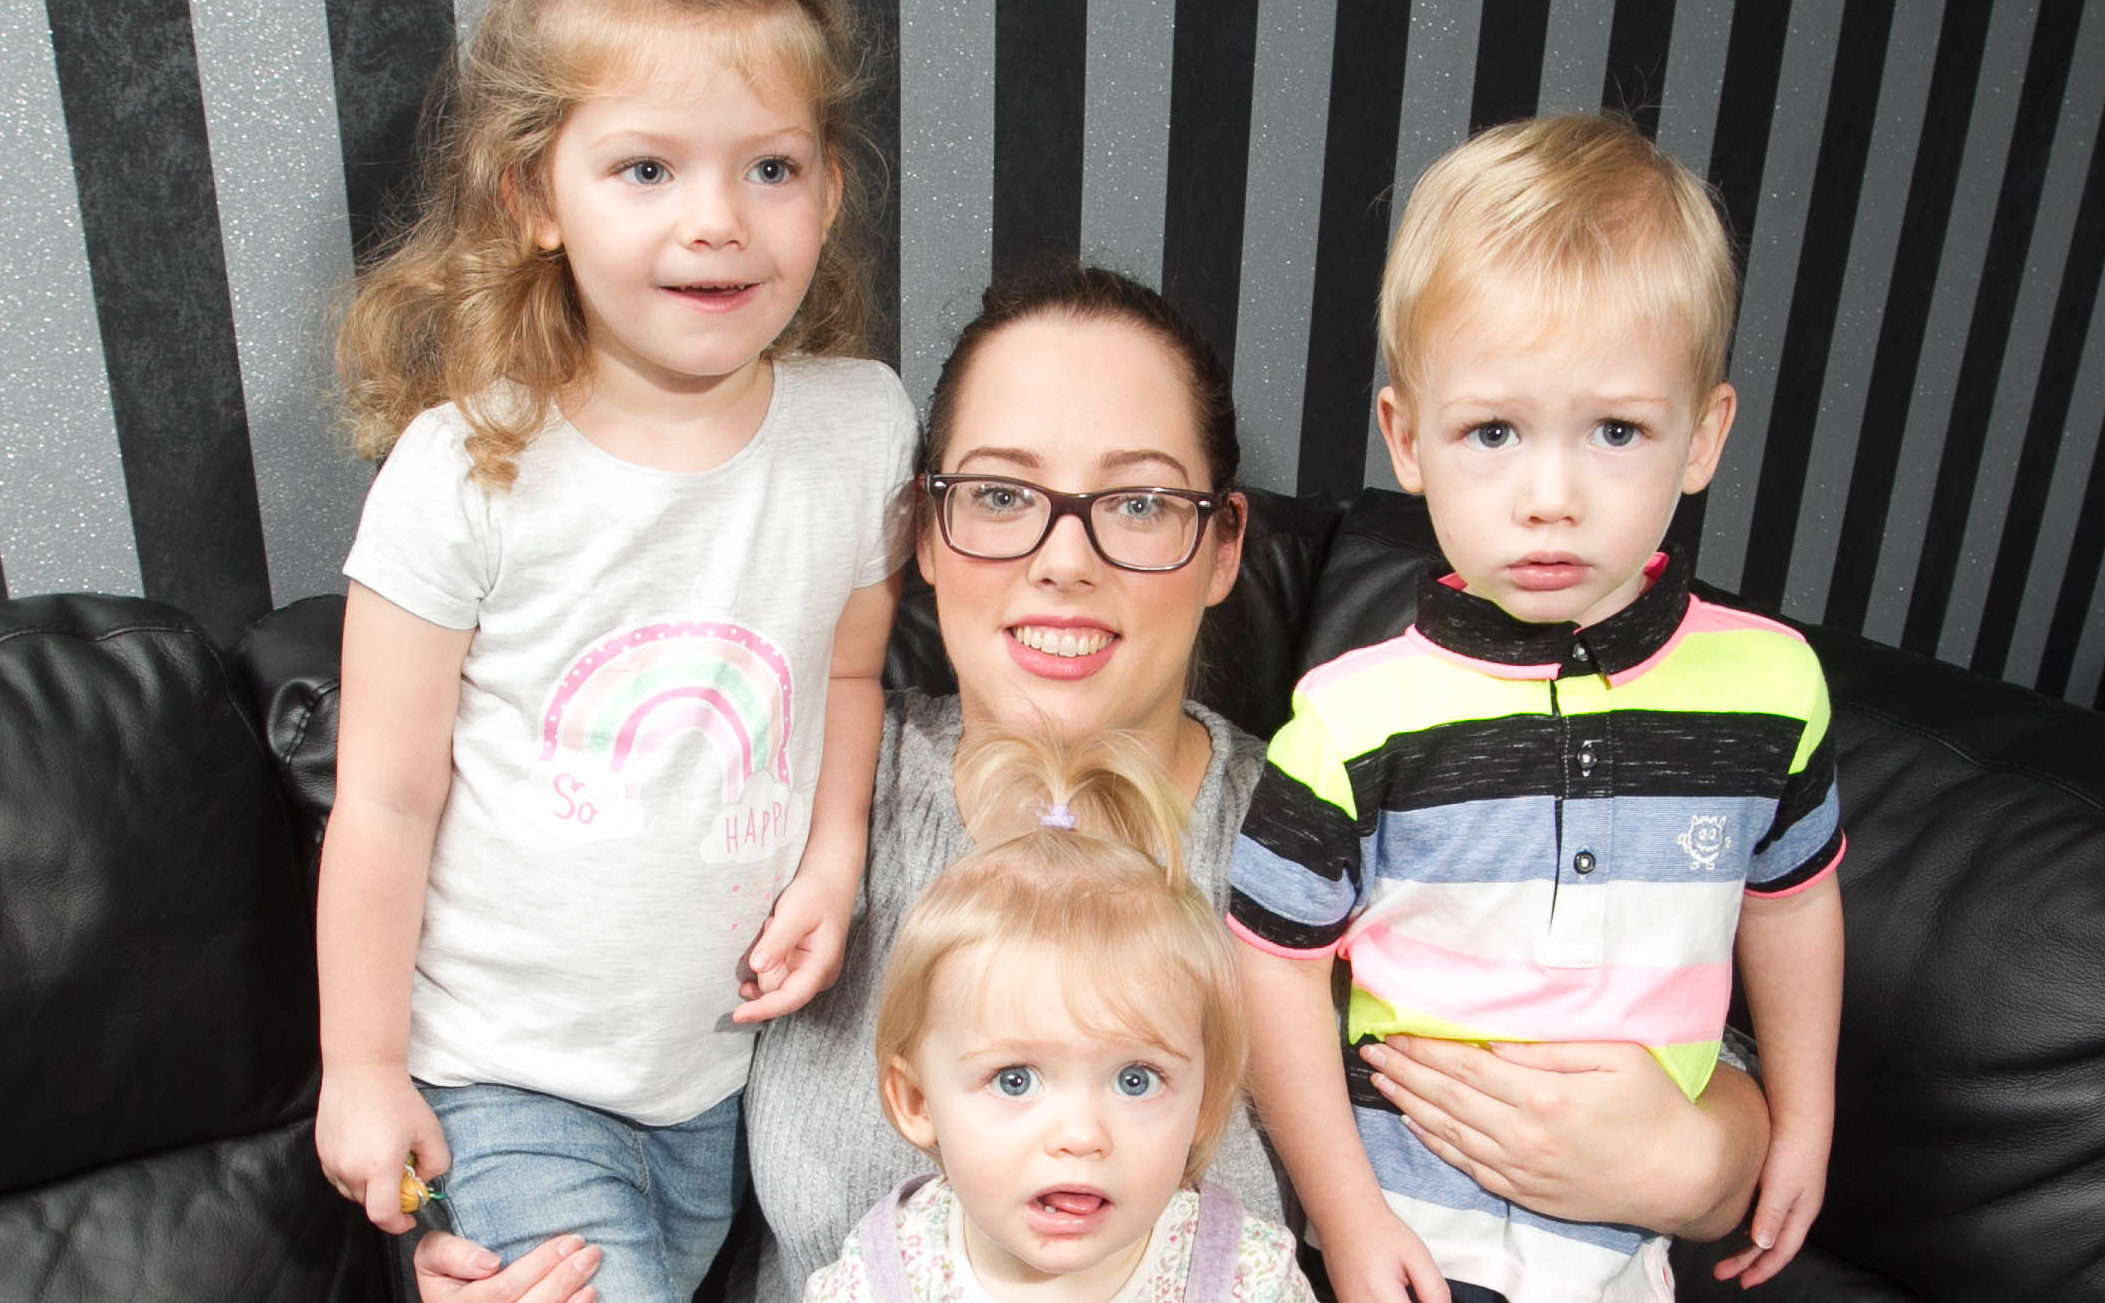 Michaela Hotchkiss (28), from Uddingston, Lanarkshire, suffered Intrahepatic Cholestasis of Pregnancy (ICP) while carrying her three children Carly, 4, Tommy, 2, and Halle, 1. (Andrew Cawley)